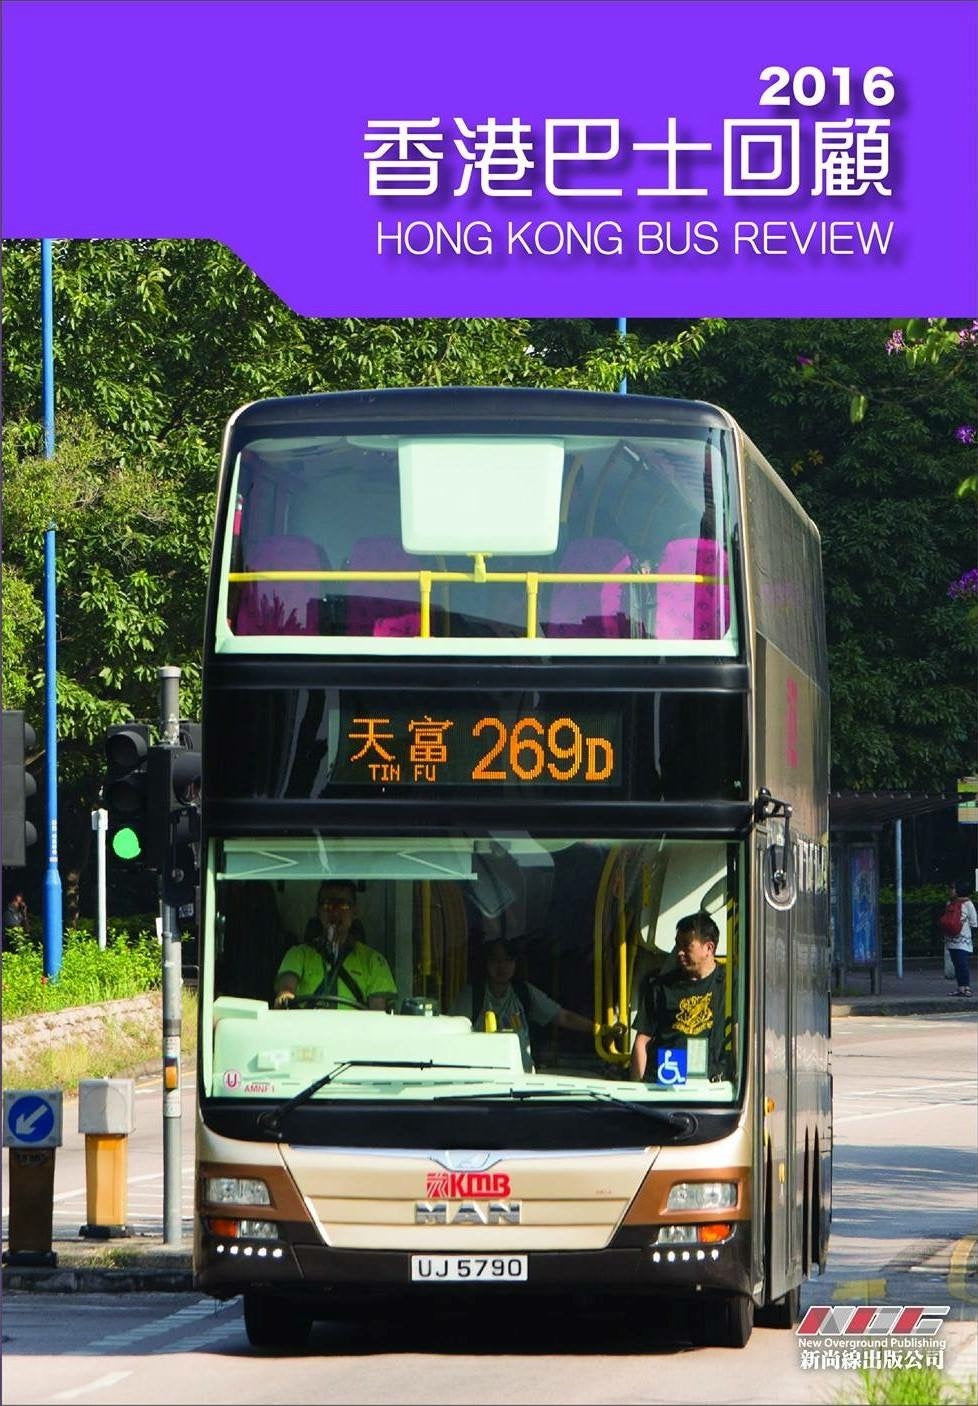 New Overground Publishing~Hong Kong Bus Review 2016